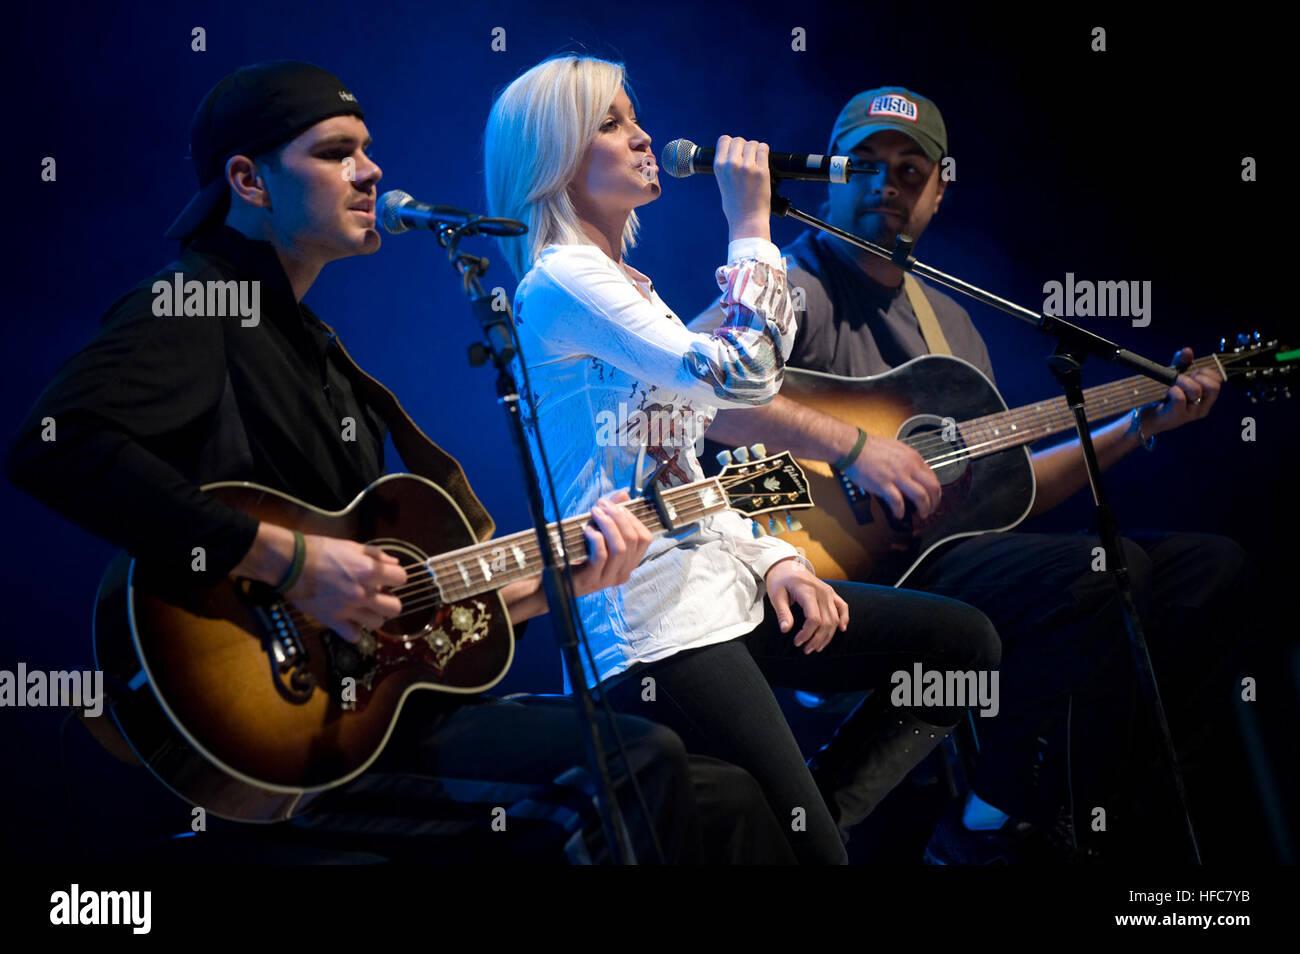 081216-N-0696M-299 American Idol contestant and country musician Kellie Pickler and band mates Joshua Henson (left) and Ryan Ochsner perform for service members during the 2008 USO Holiday Tour stop at Ramstein Air Force Base, Germany. Tour host U.S. Navy Adm. Mike Mullen, chairman of the Joint Chiefs of Staff and his wife Deborah were also joined by comedians Lewis Black, Kathleen Madigan and John Bowman; Actress Tichina Arnold and Grammy award winning musician Kid Rock on the tour bringing joy to service members and their families stationed overseas. (DoD photo by Mass Communication Speciali Stock Photo